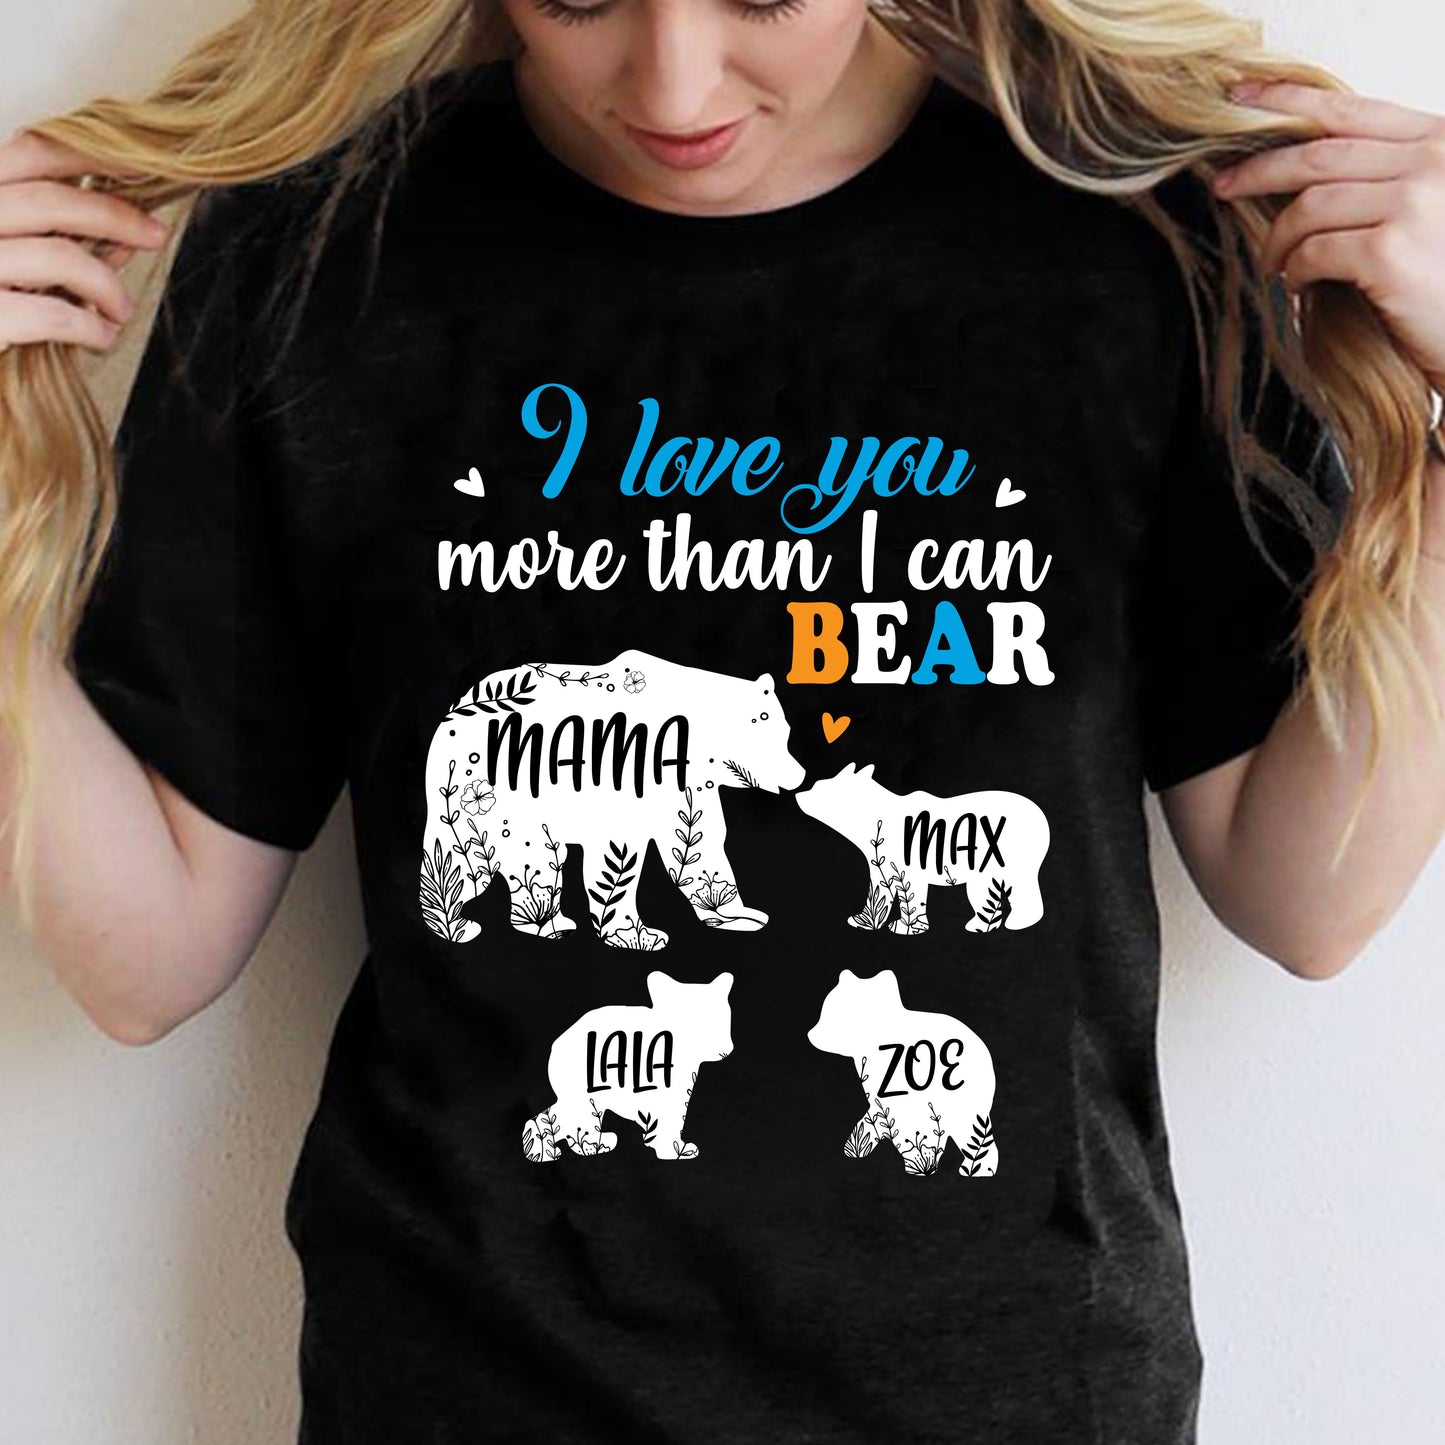 Custom Personalized Mama bear T shirts printing, mother daughter son unique gifts, best gifts for new moms, Mother's day gifts for bear lovers - I Love You More Than I Can Bear - PersonalizedWitch